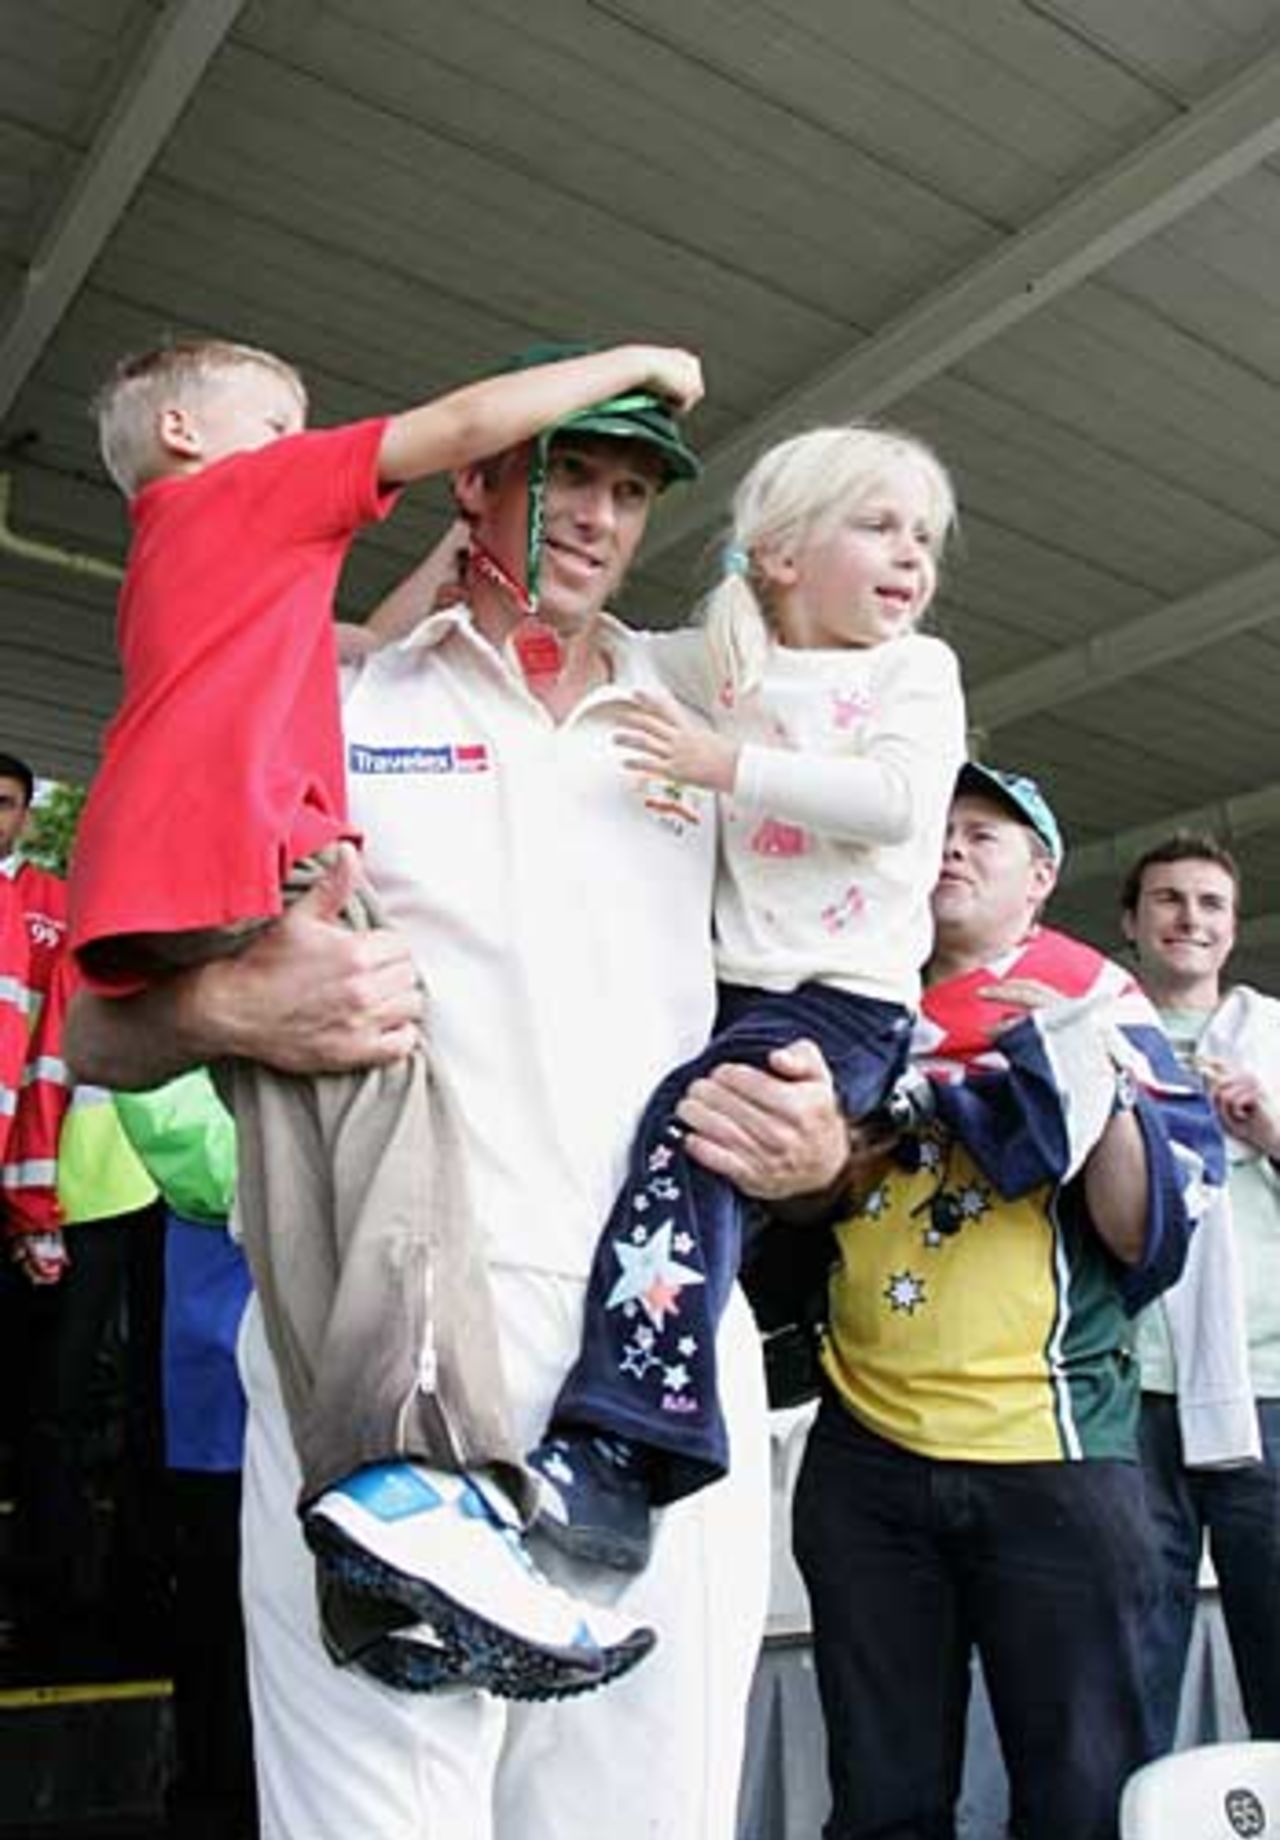 Glenn McGrath with his children after Australia's first Test win, England v Australia, 1st Test, Lord's, July 24